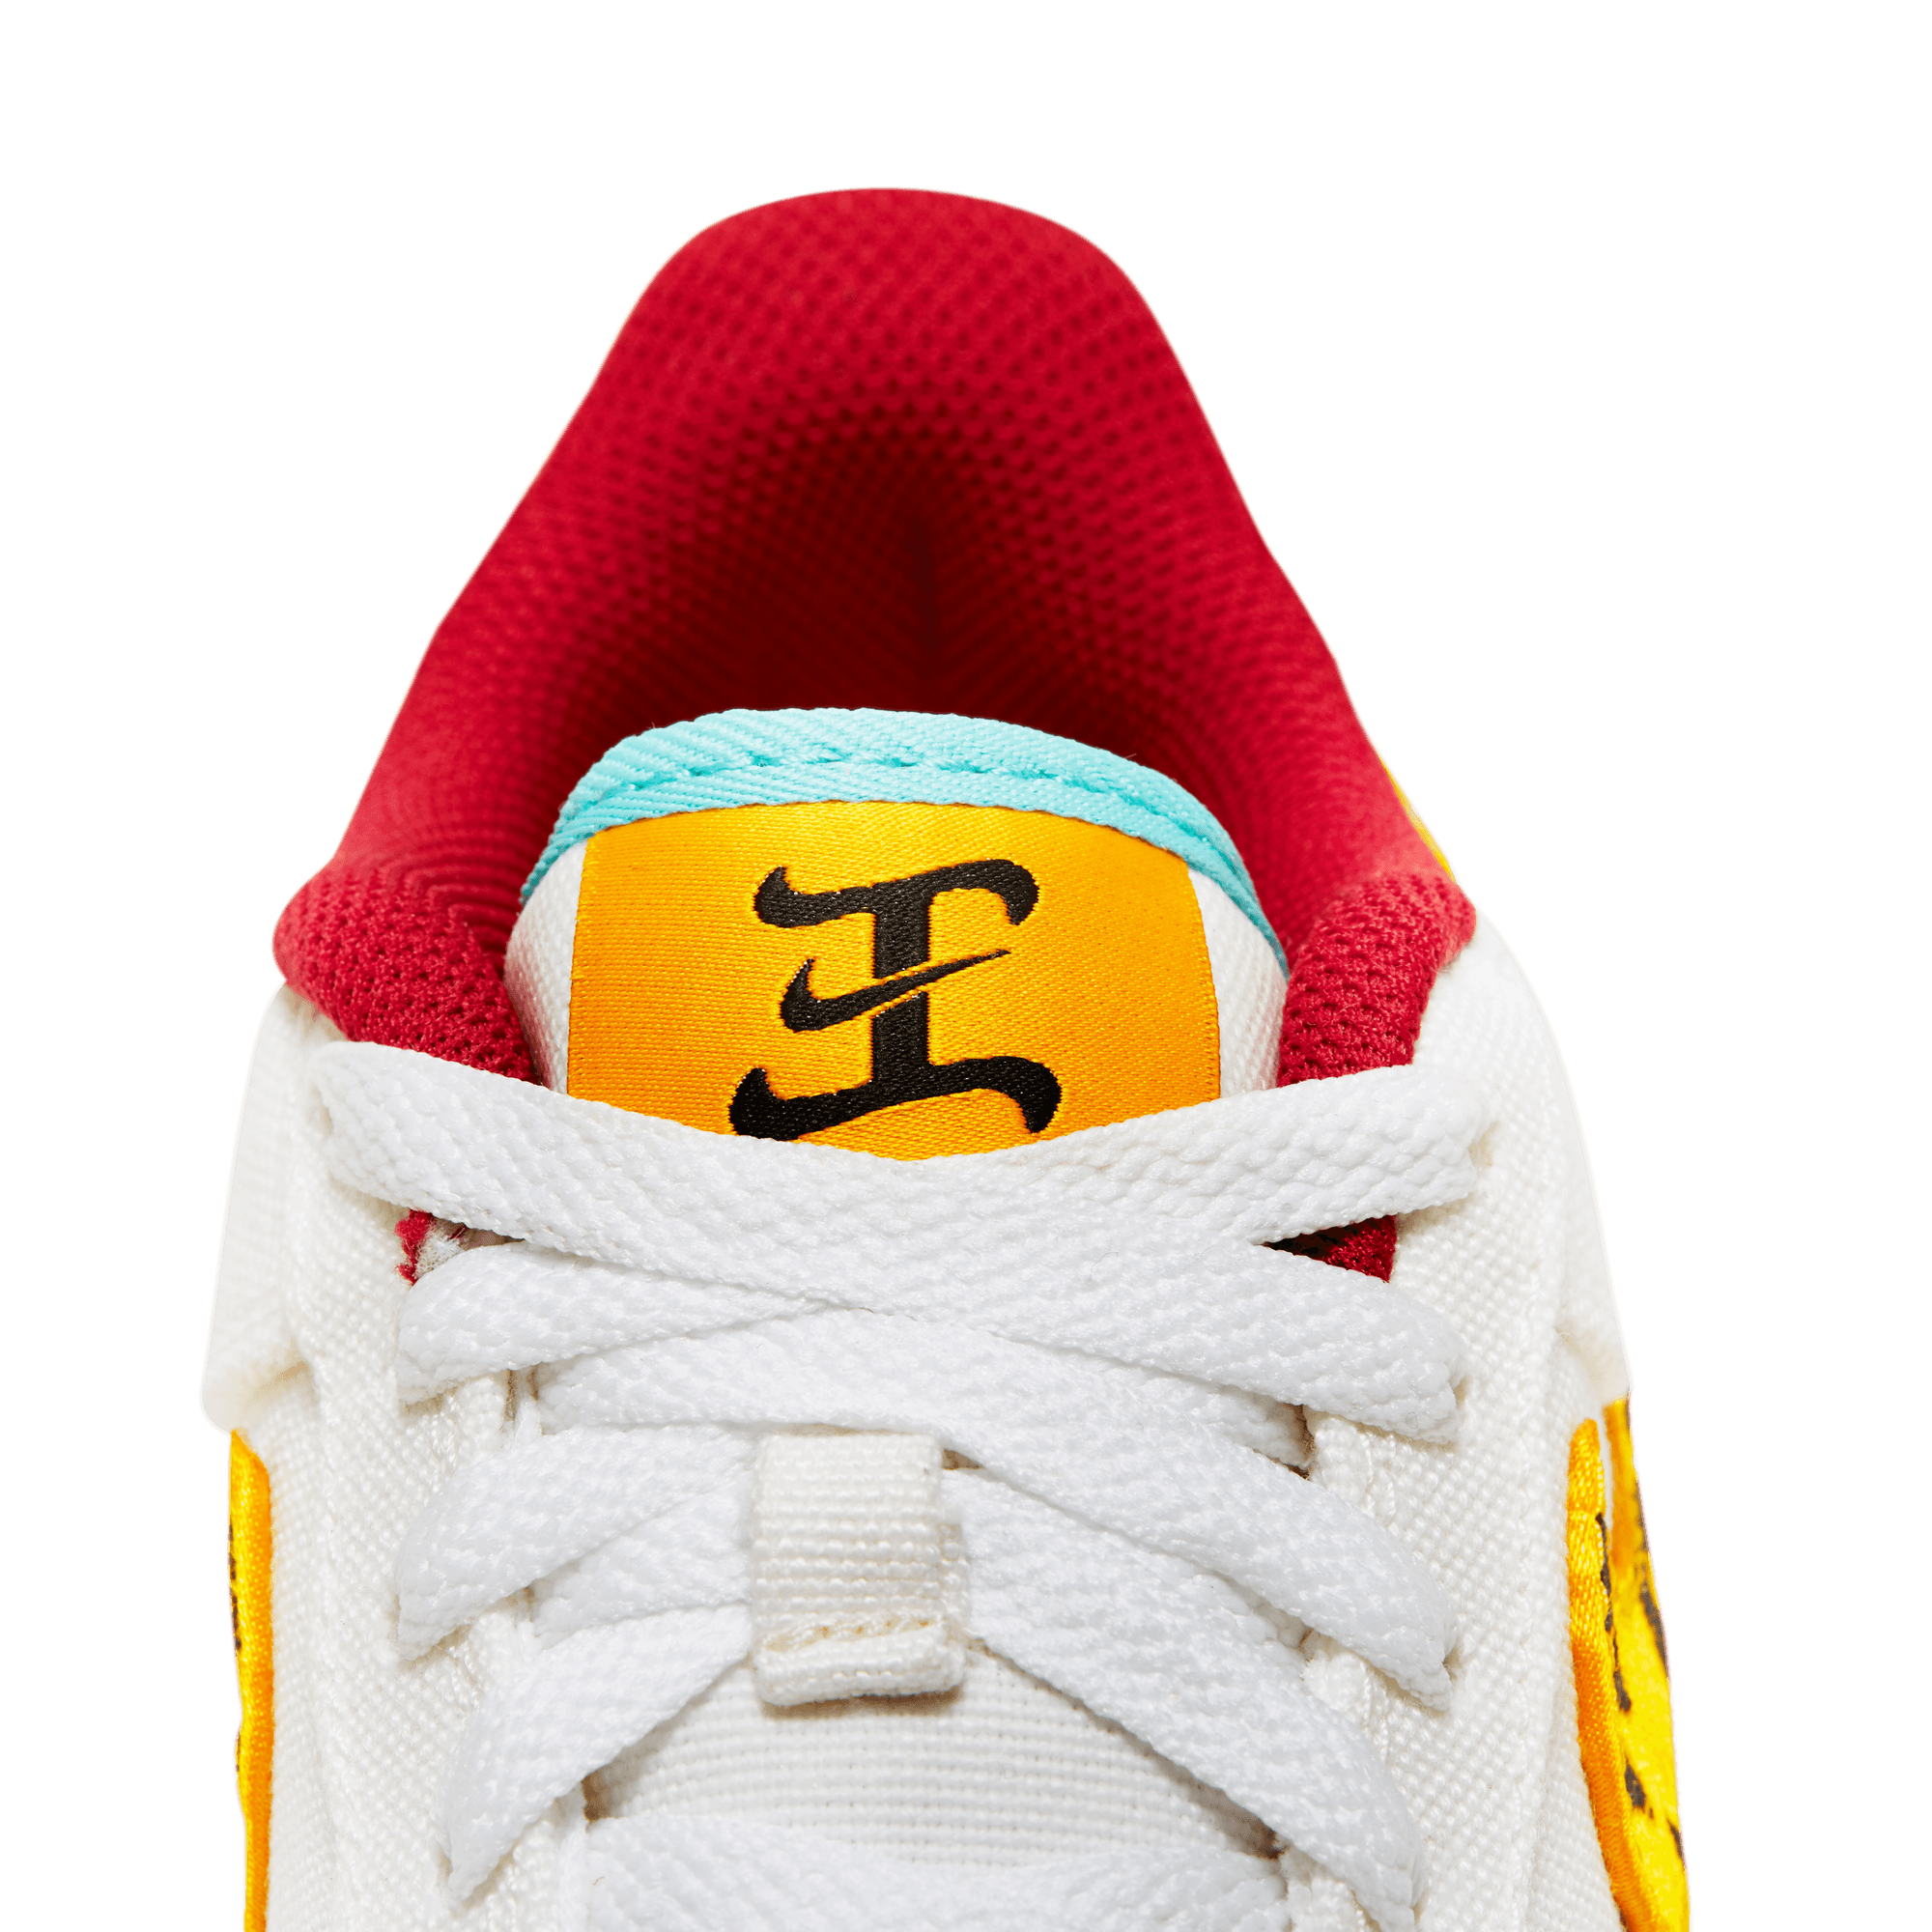 Air Force 1 LV8 Grade School Lifestyle Shoe (White/Gold)